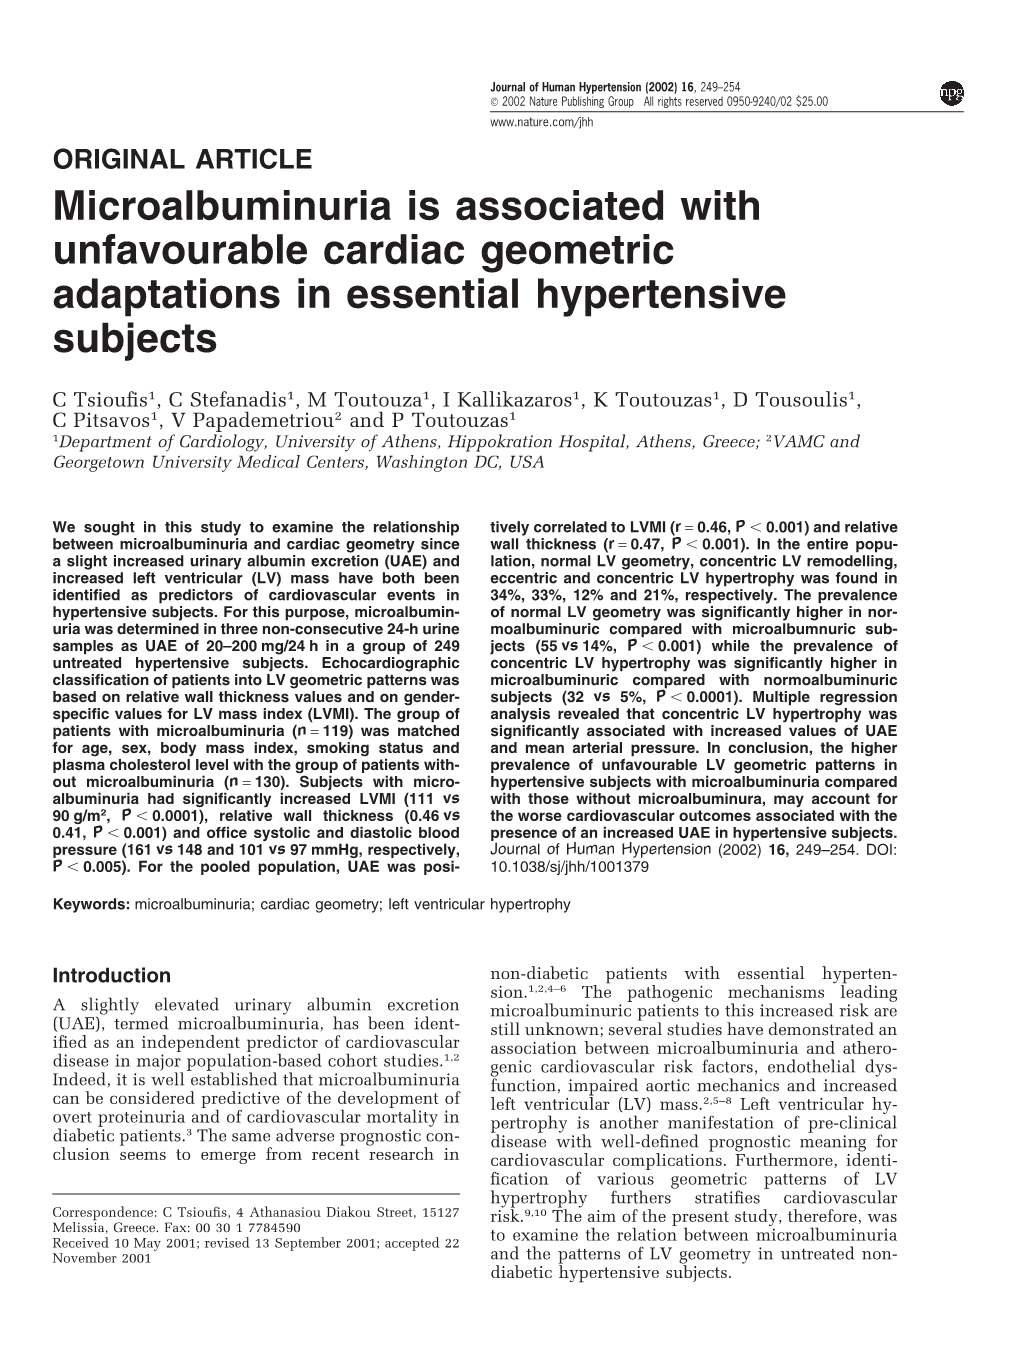 Microalbuminuria Is Associated with Unfavourable Cardiac Geometric Adaptations in Essential Hypertensive Subjects